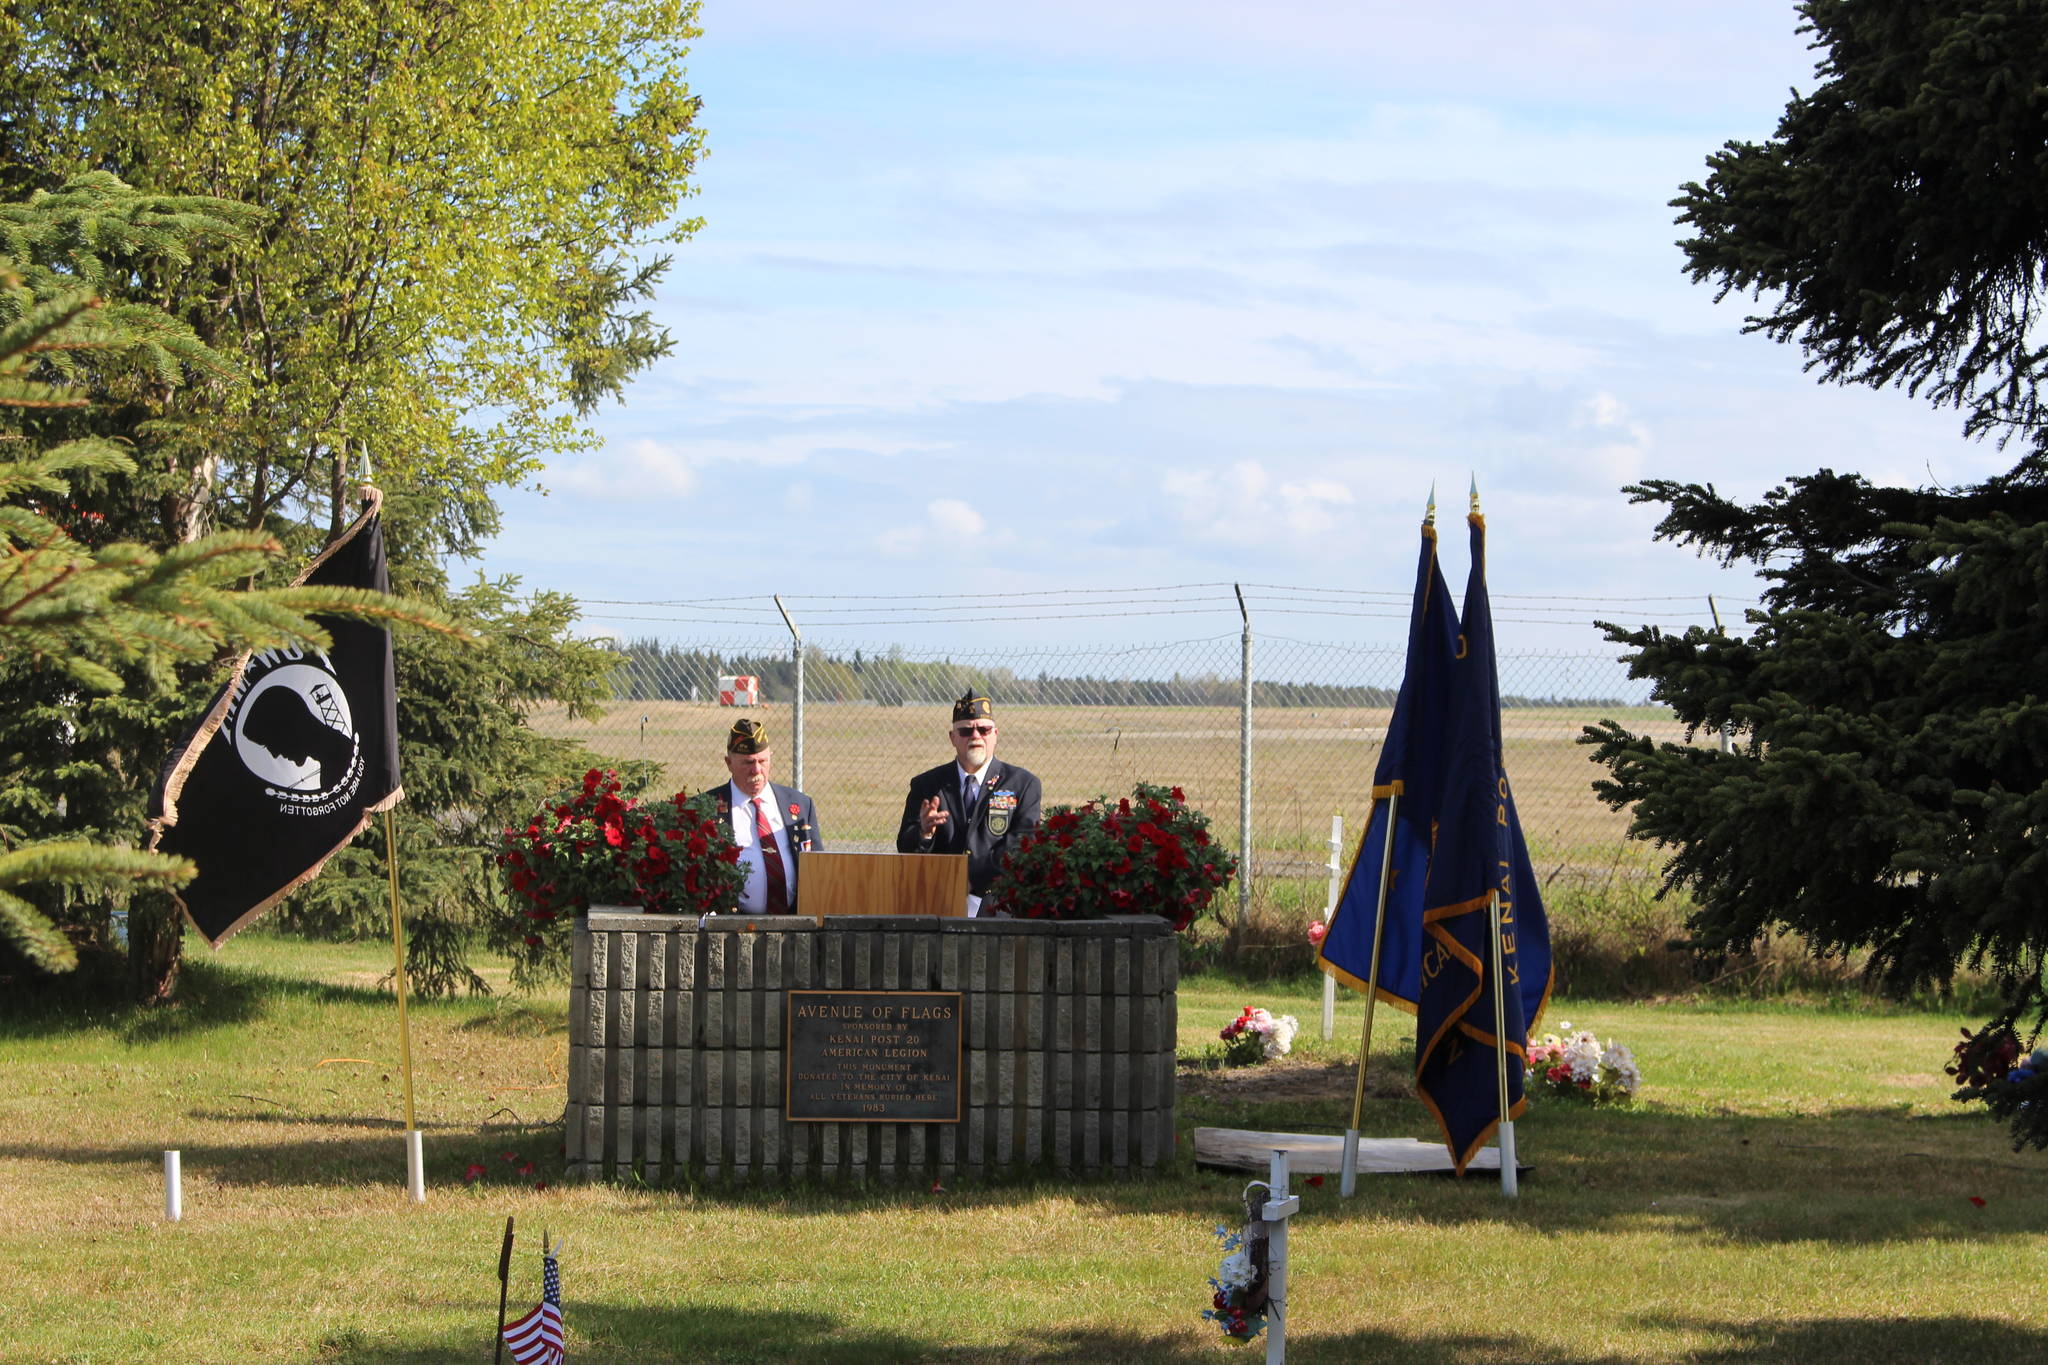 Mike Meredith and Greg Fite, members of the Kenai Post of the VFW, prepare to hold a Memorial Day ceremony at the Kenai Cemetery on May 25, 2020. (Photo by Brian Mazurek/Peninsula Clarion)